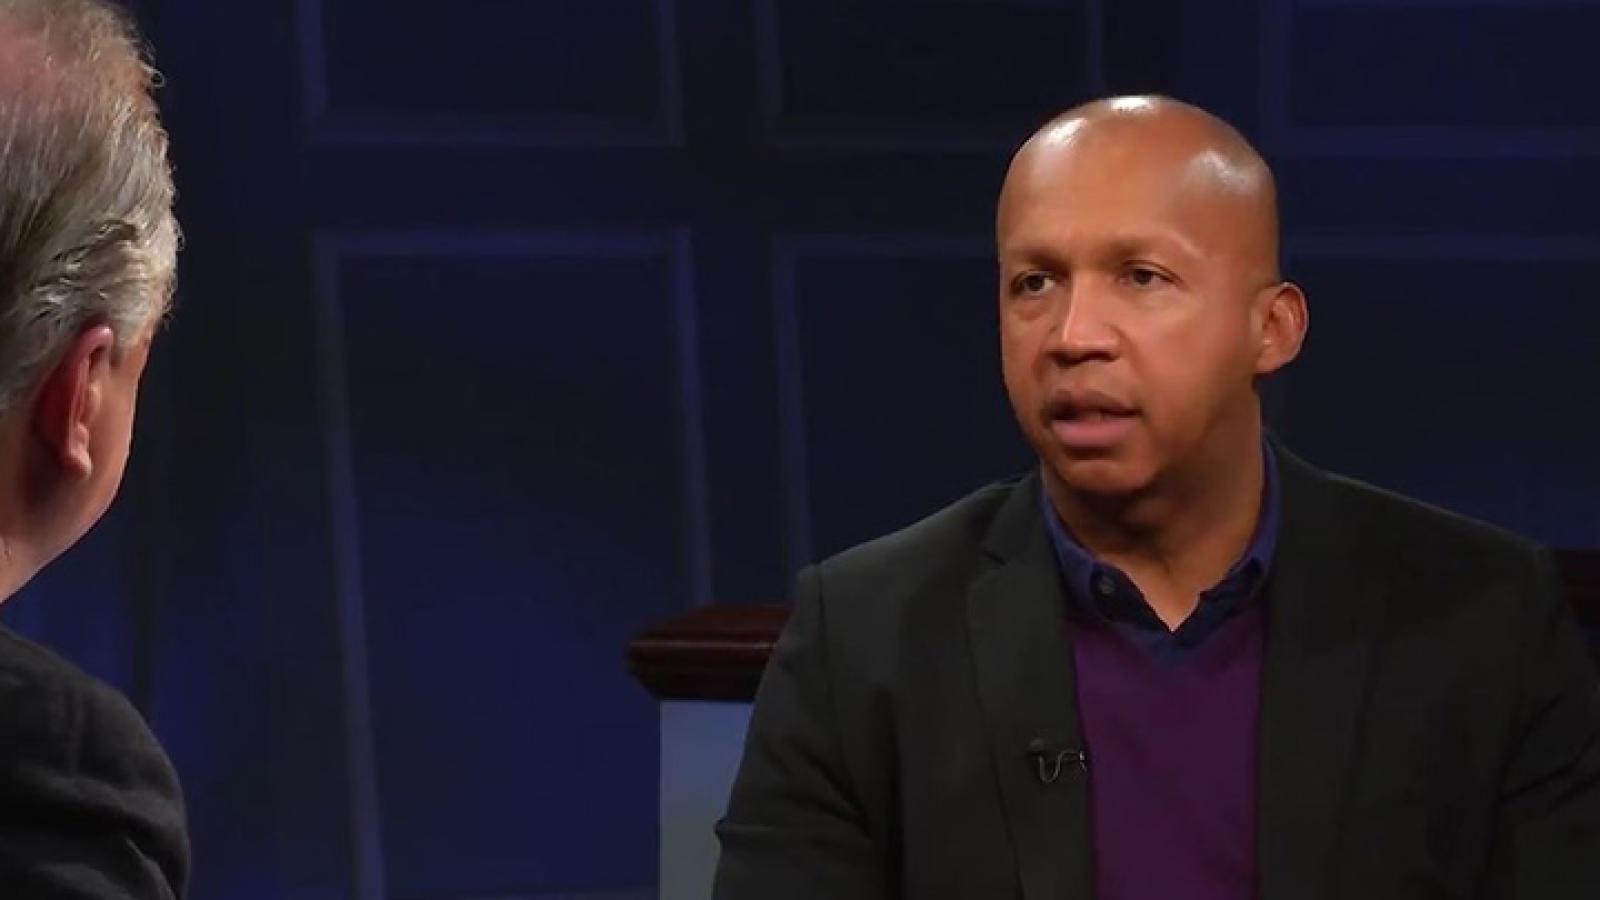 Civil rights lawyer Bryan Stevenson discusses the legal system's commitment to equal justice